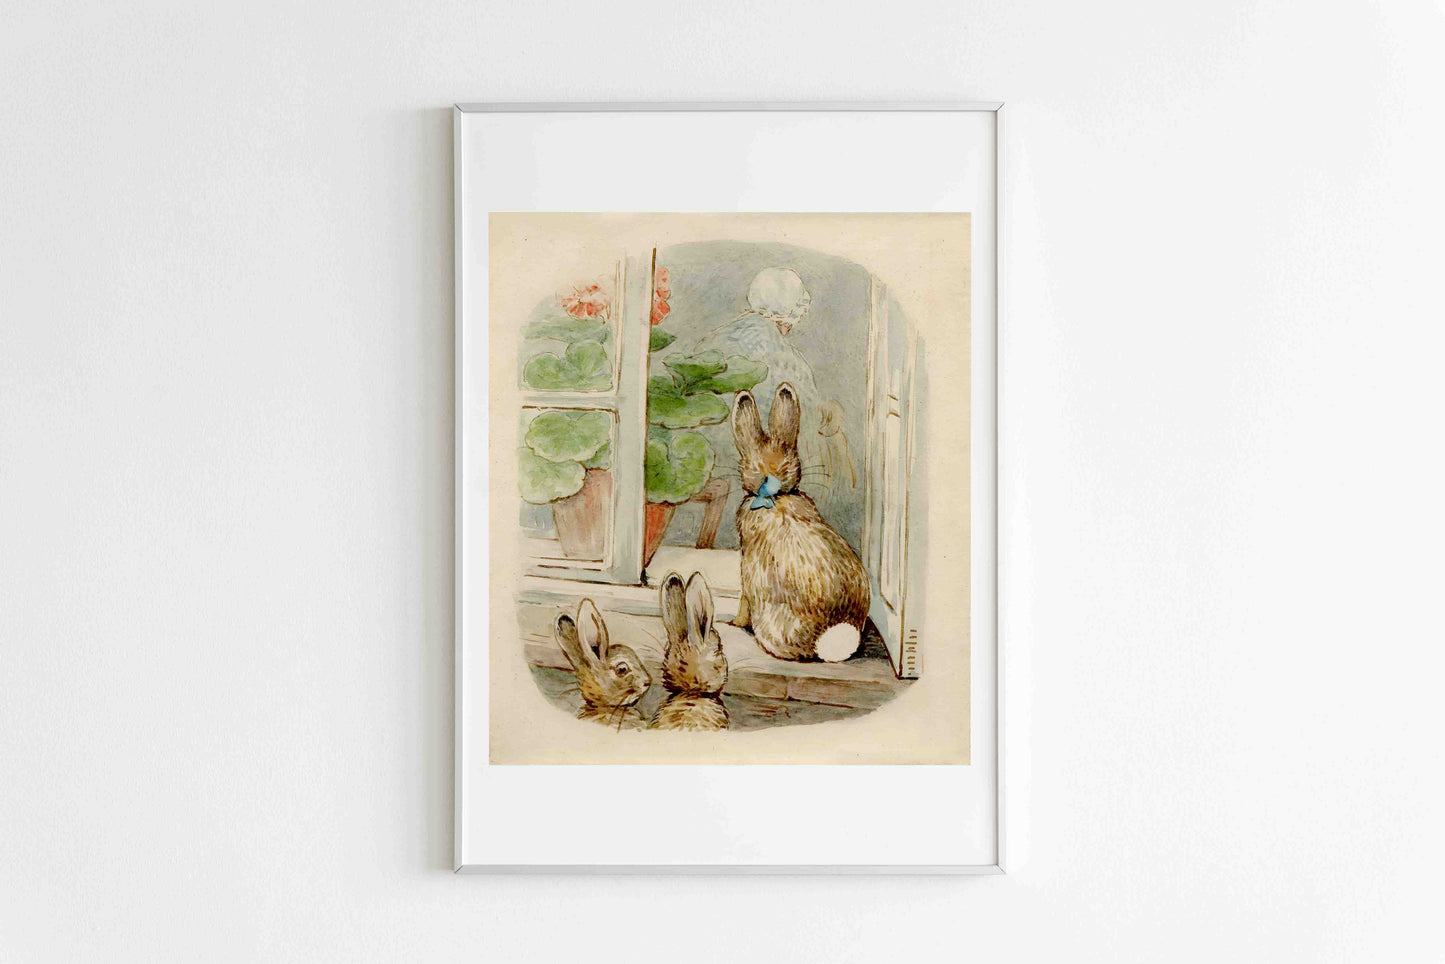 Page 77 of The Tale of the Flopsy Bunnies; Beatrix Potter - Framed